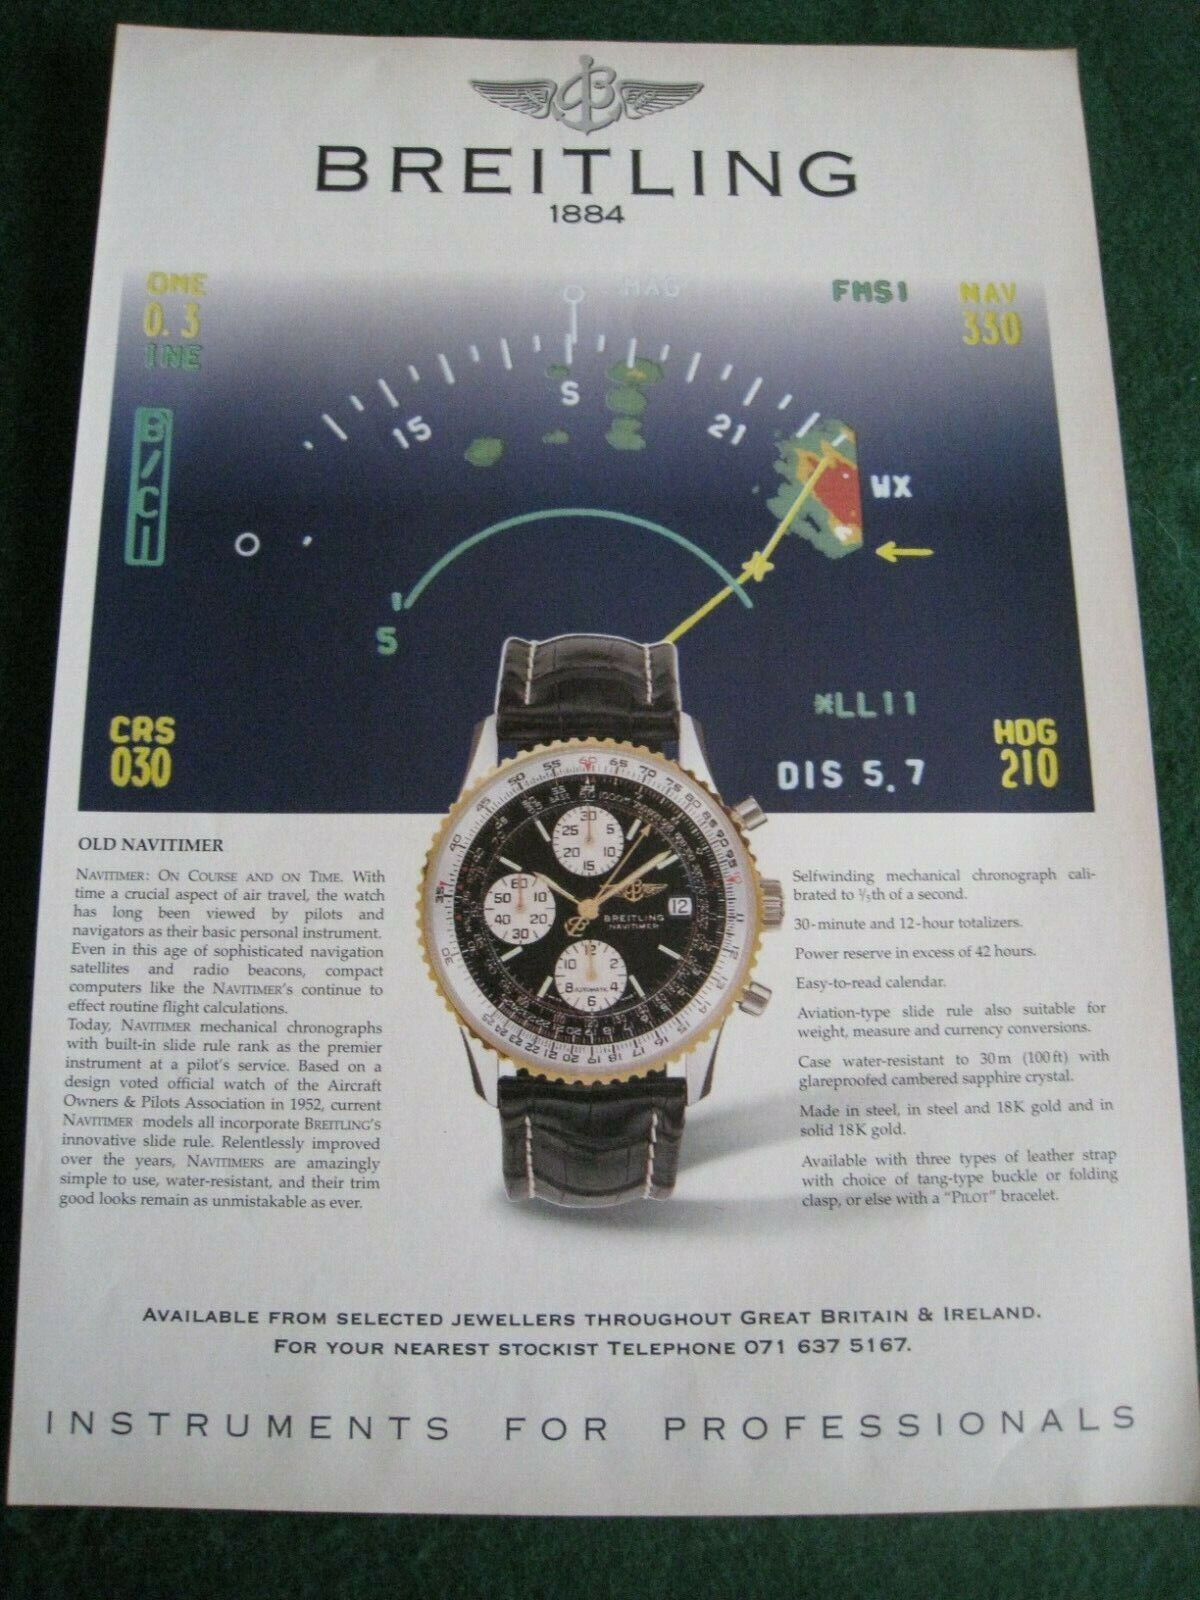 BREITLING WATCH OLD NAVITIMER INSTRUMENTS PROFESSION ADVERT APPRX A4 SIZE FILE 3